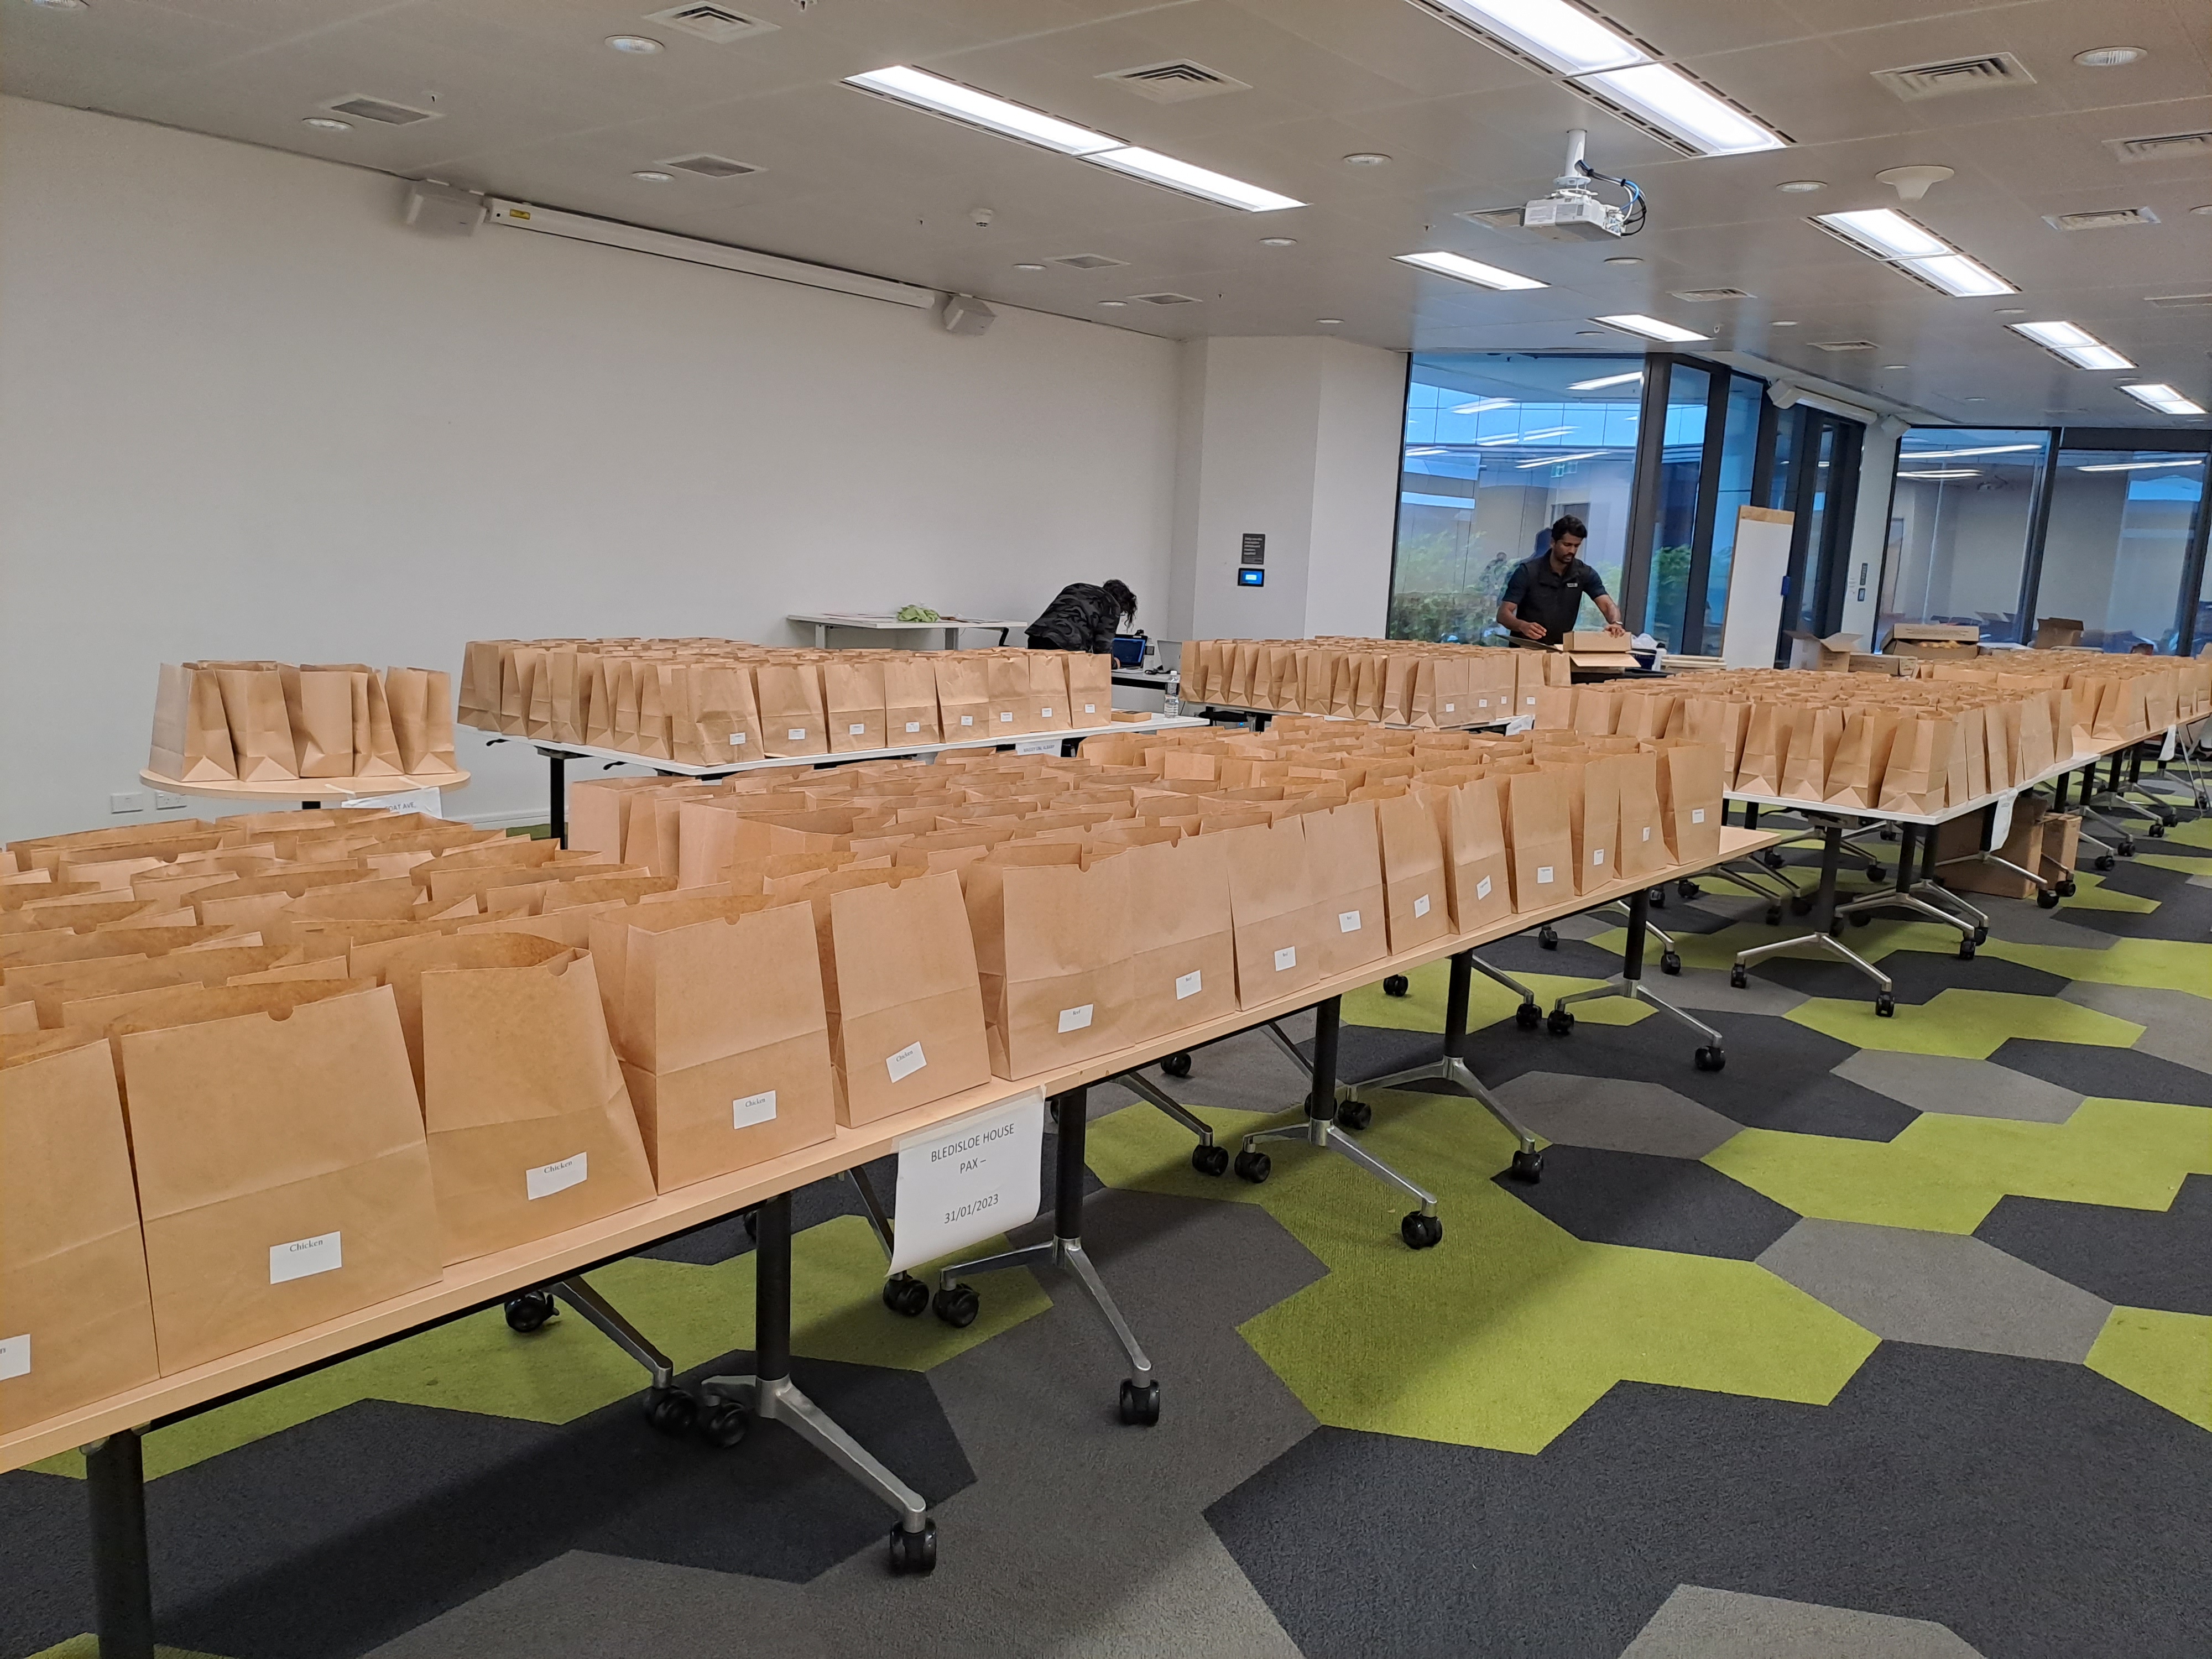 Auckland Council catering services have made up to 1,000 meals a day